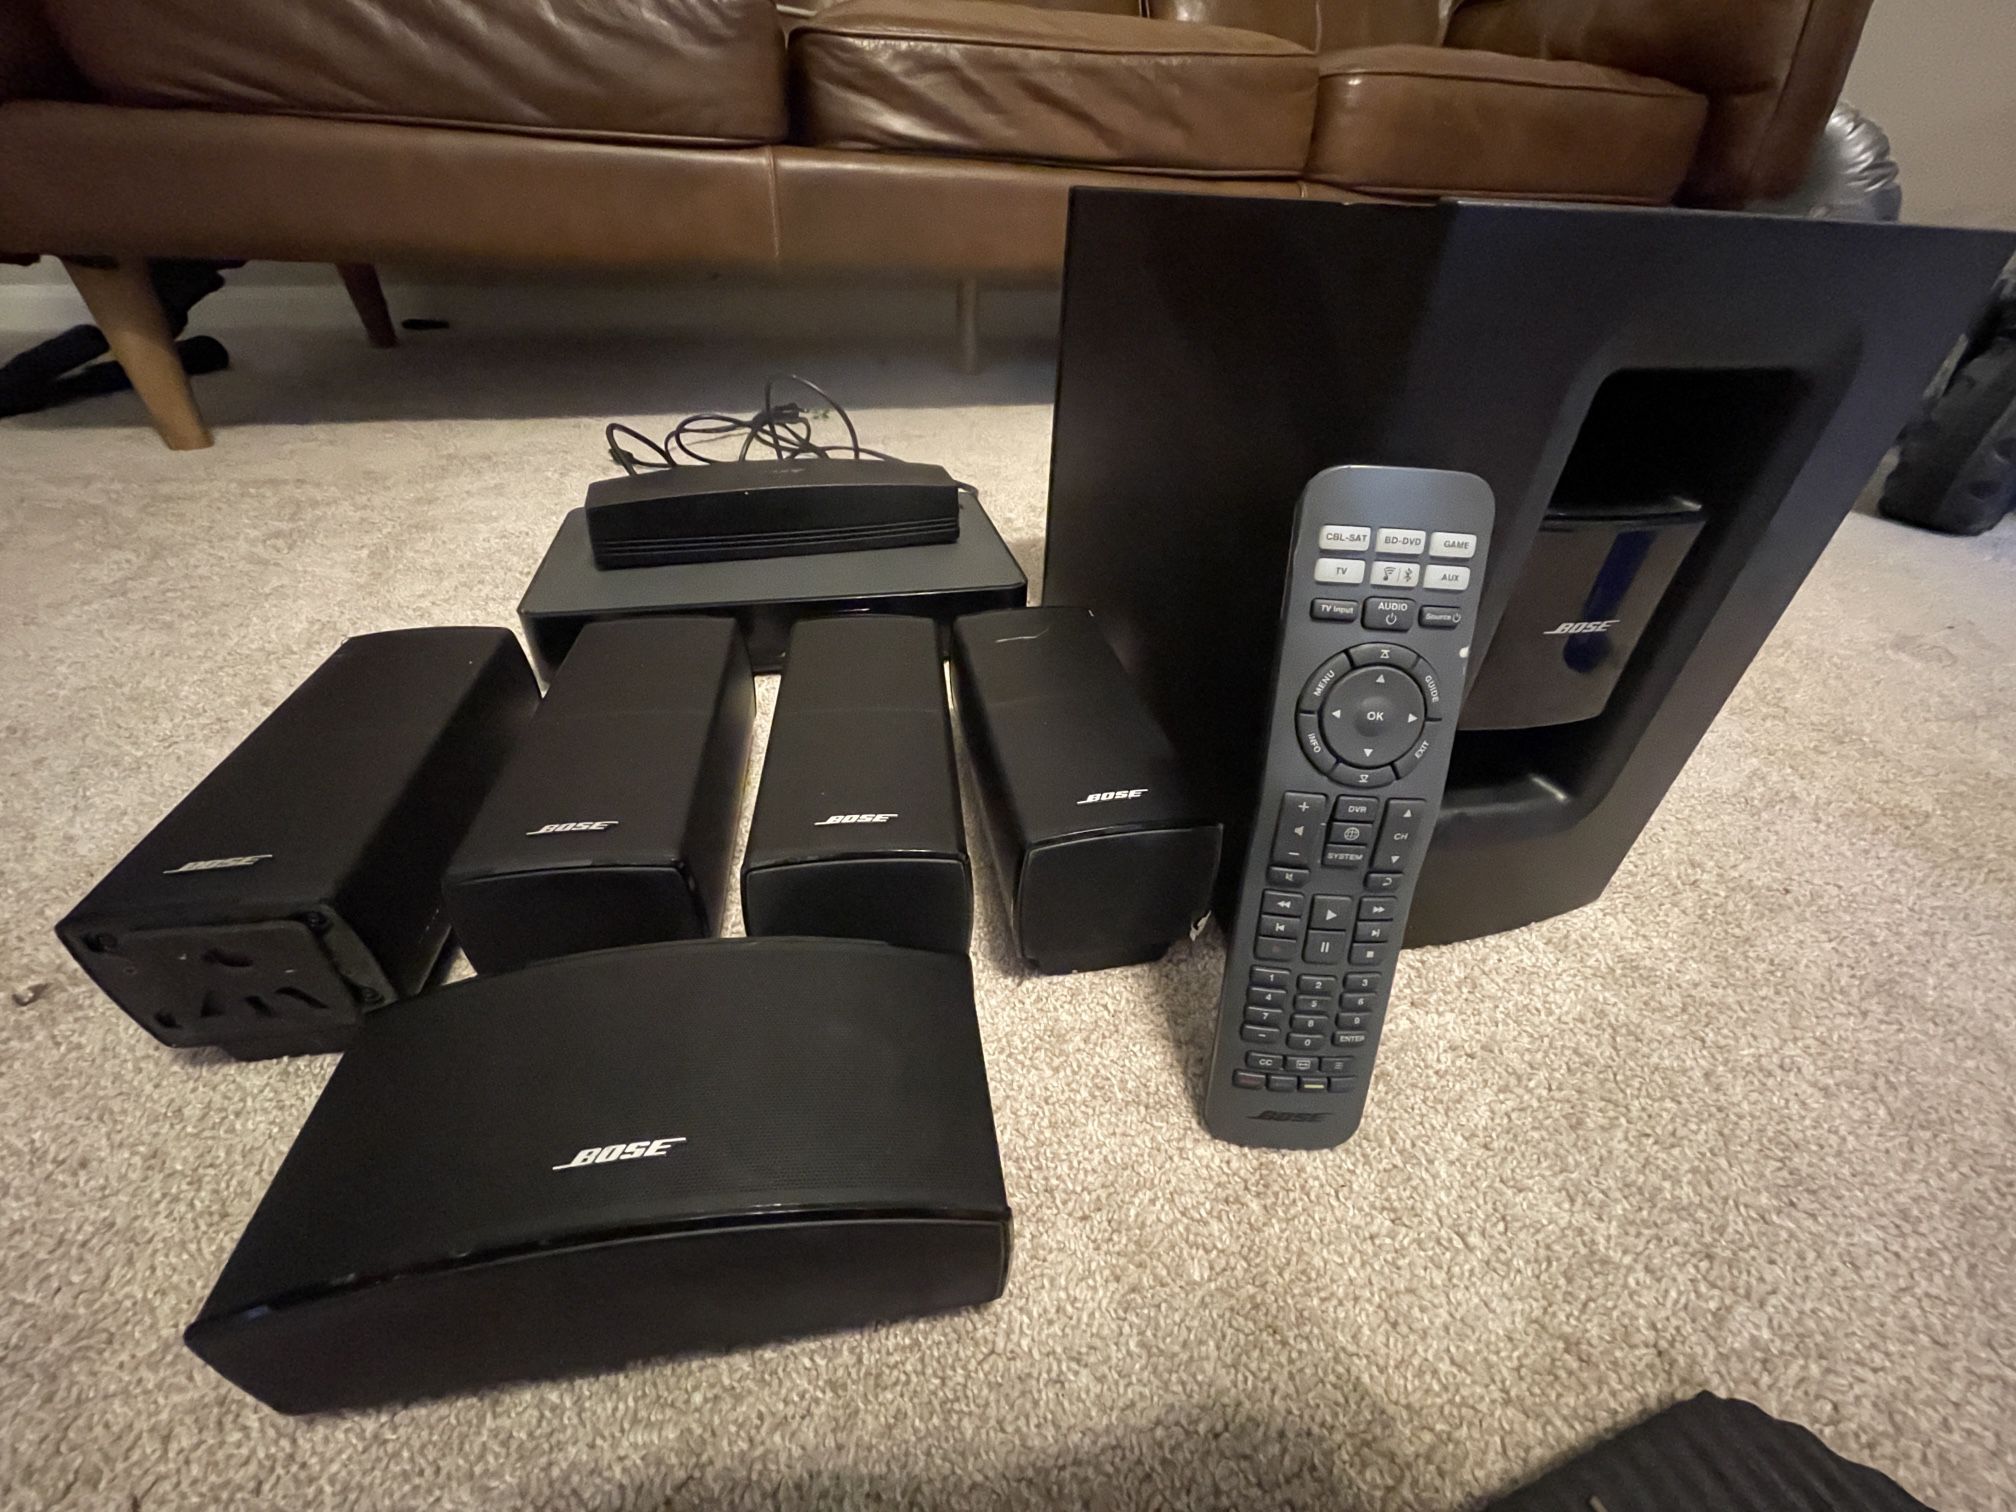 pad Il Rosefarve Bose Cinemate 520 Surround Sound System for Sale in Spring, TX - OfferUp